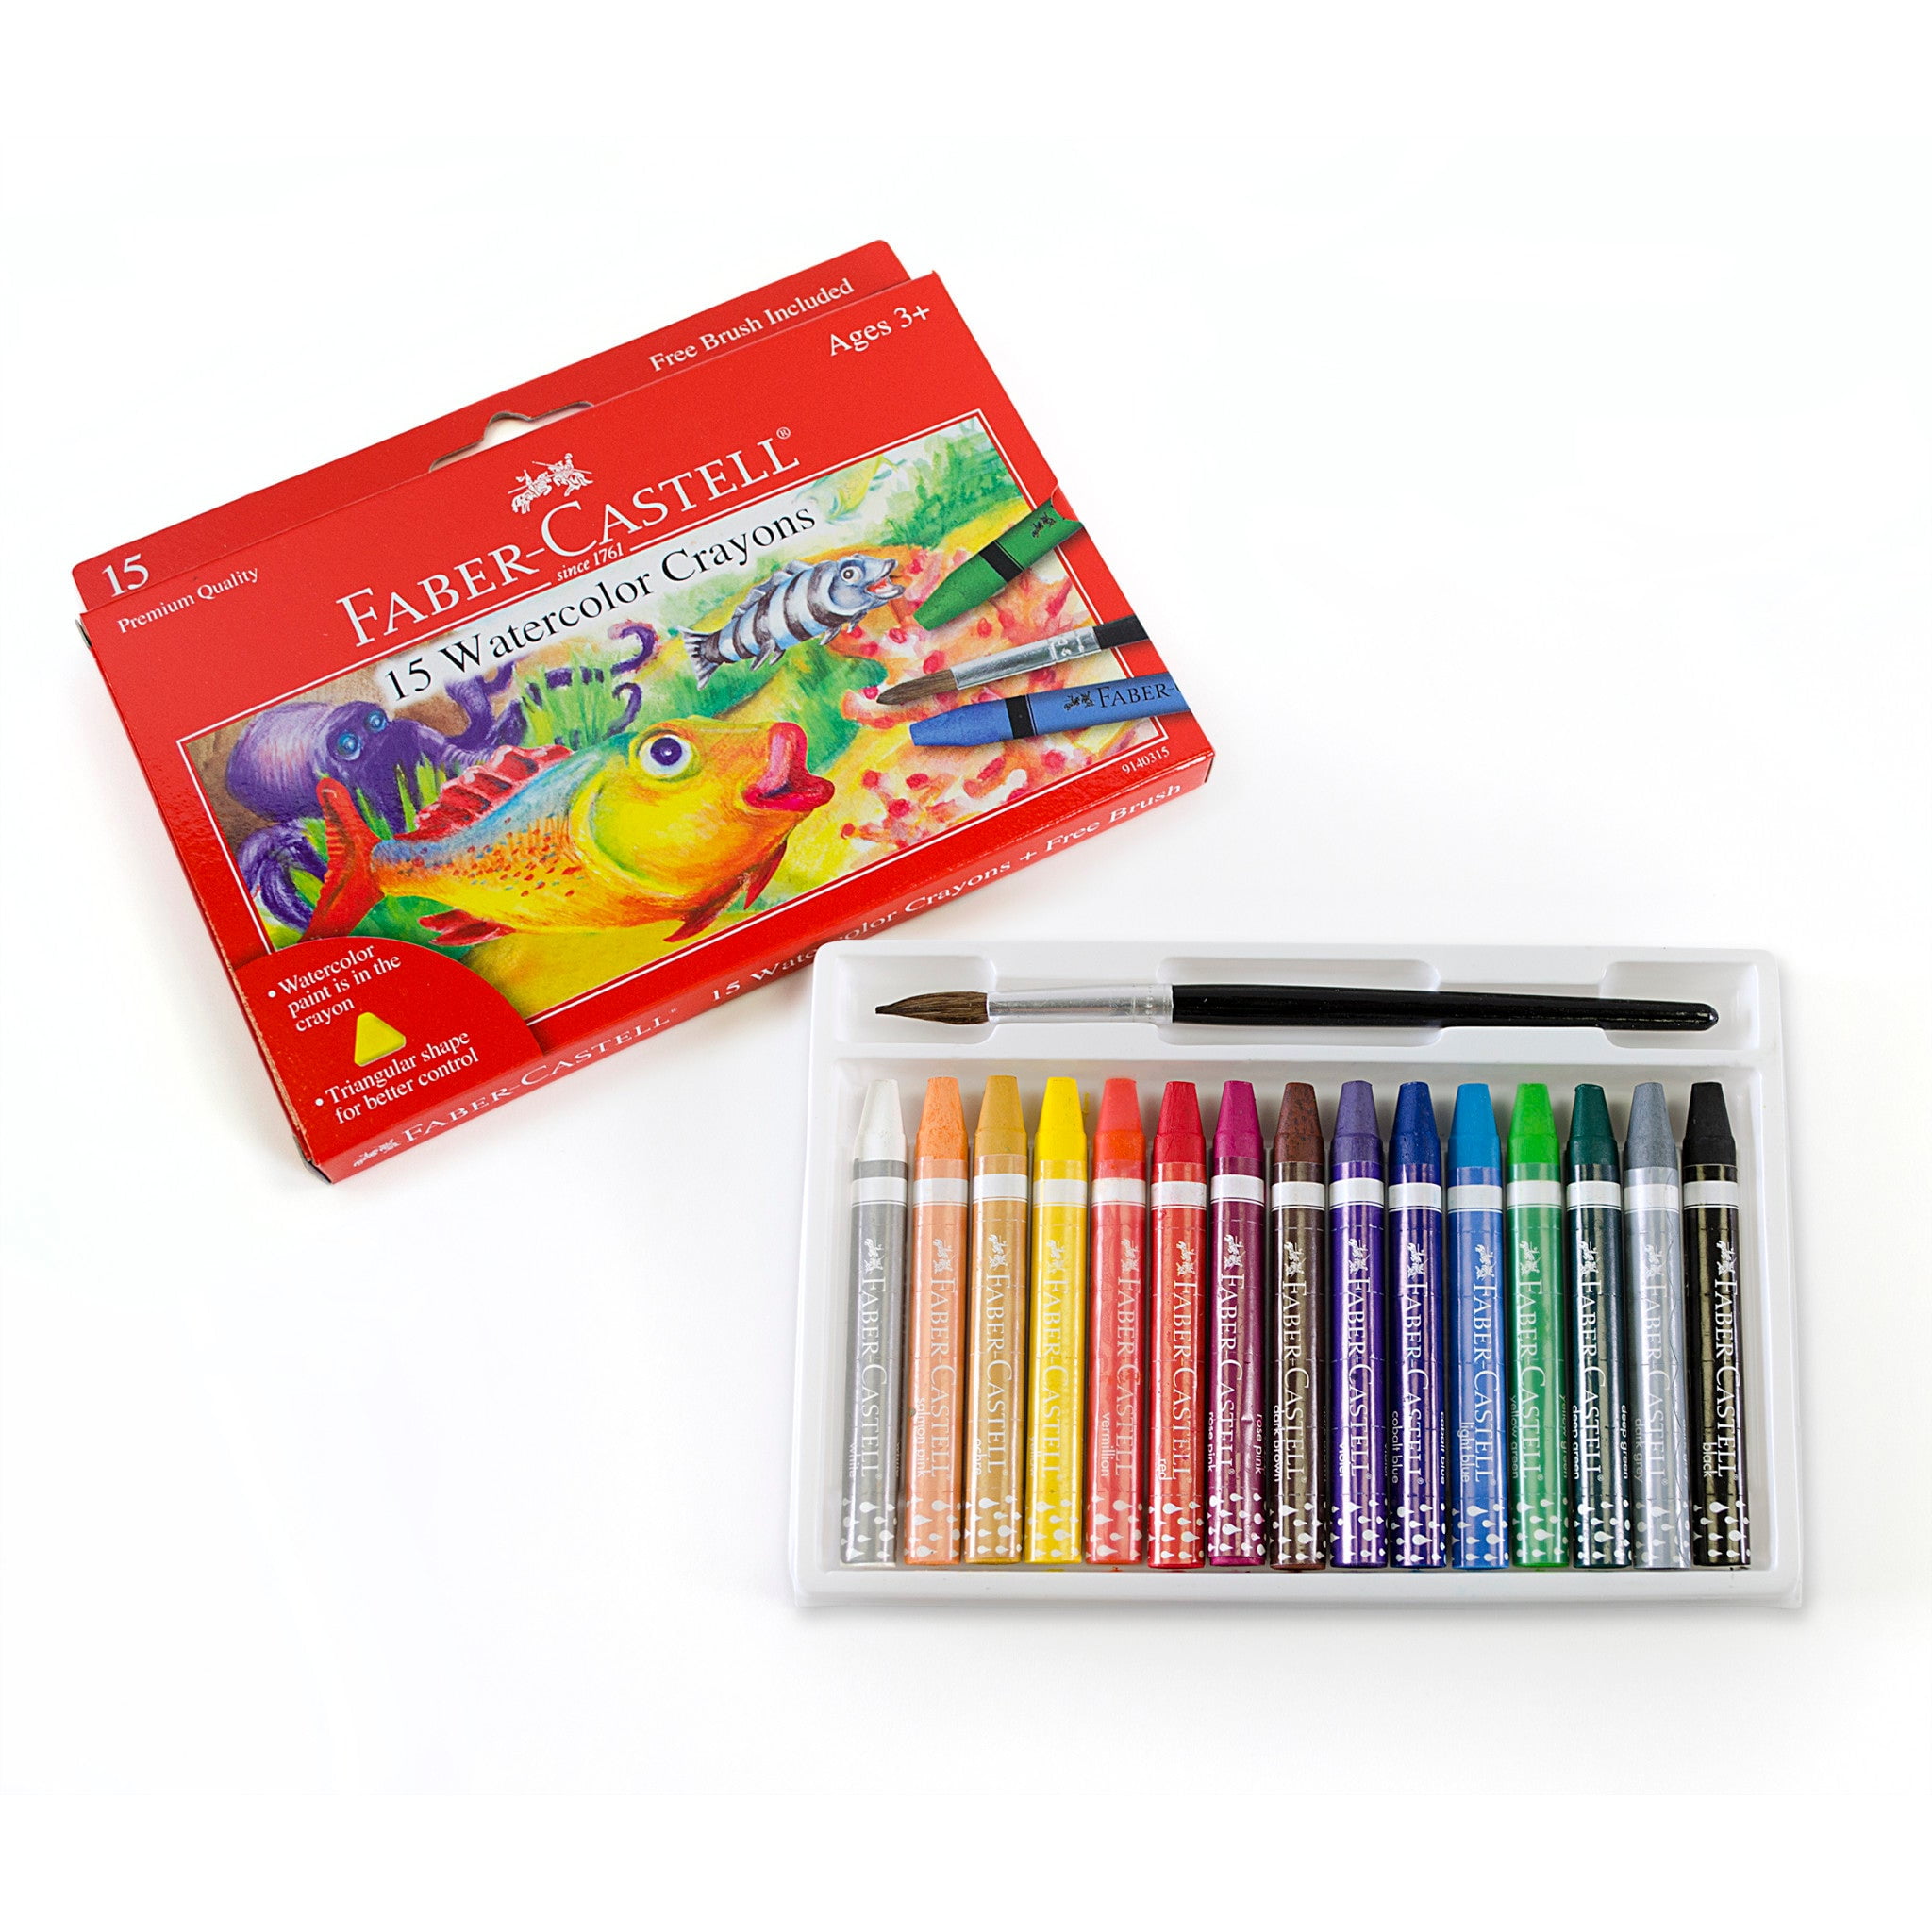 Faber-Castell Watercolor Paint Set with Brush - Premium Washable